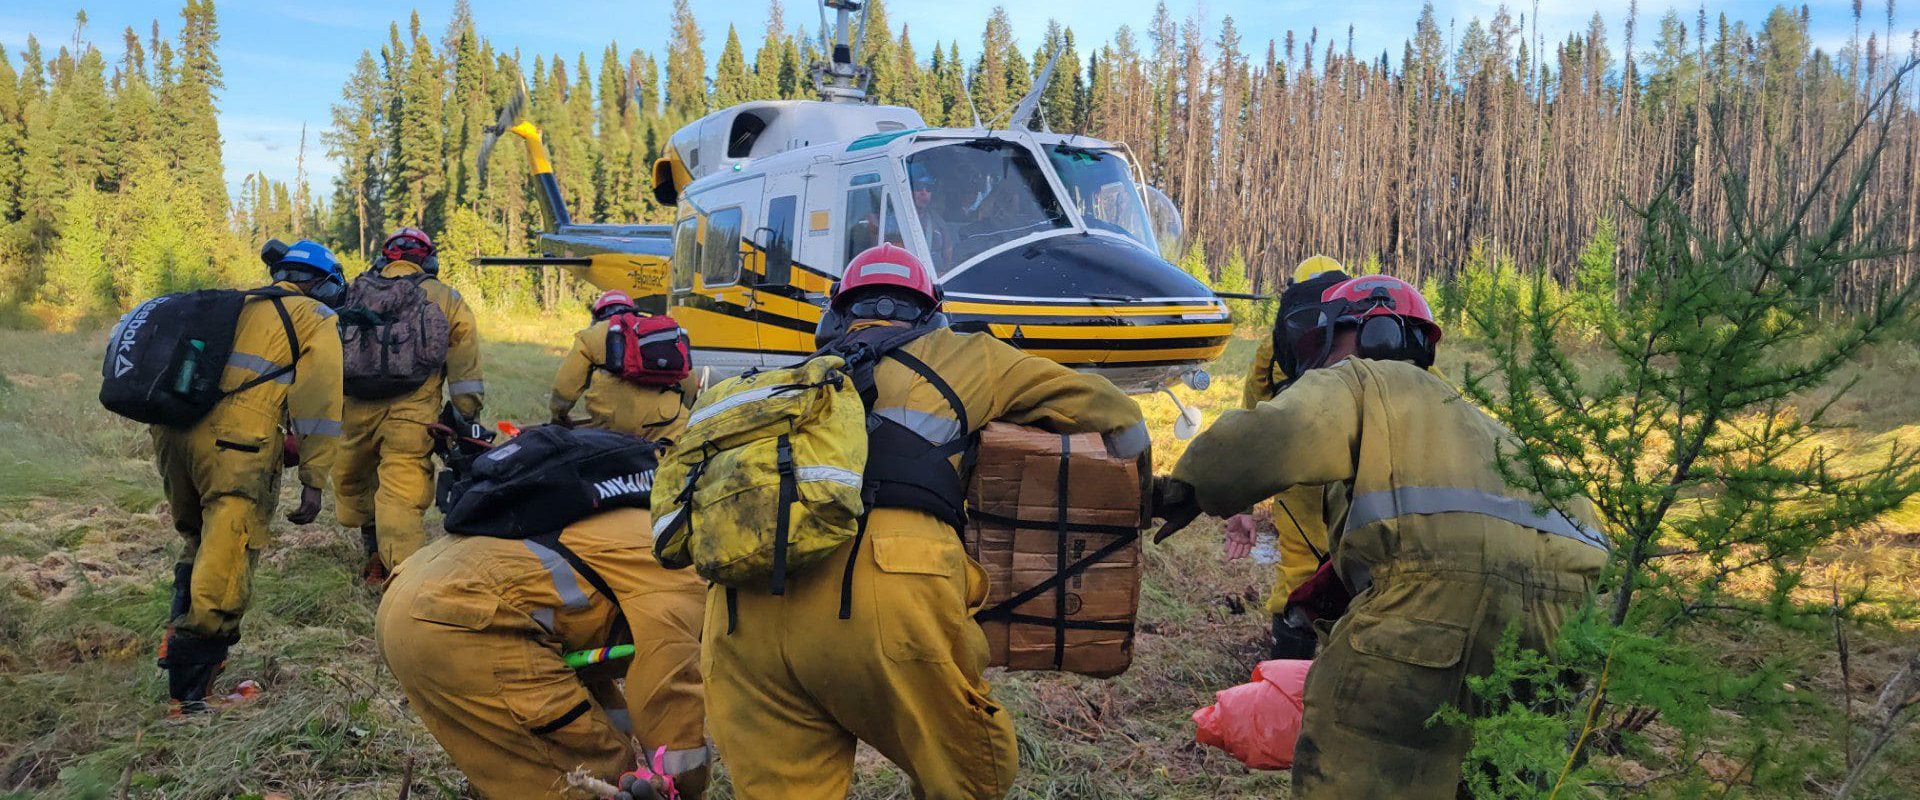 Bell 212 helicopter picking up wildfire crew